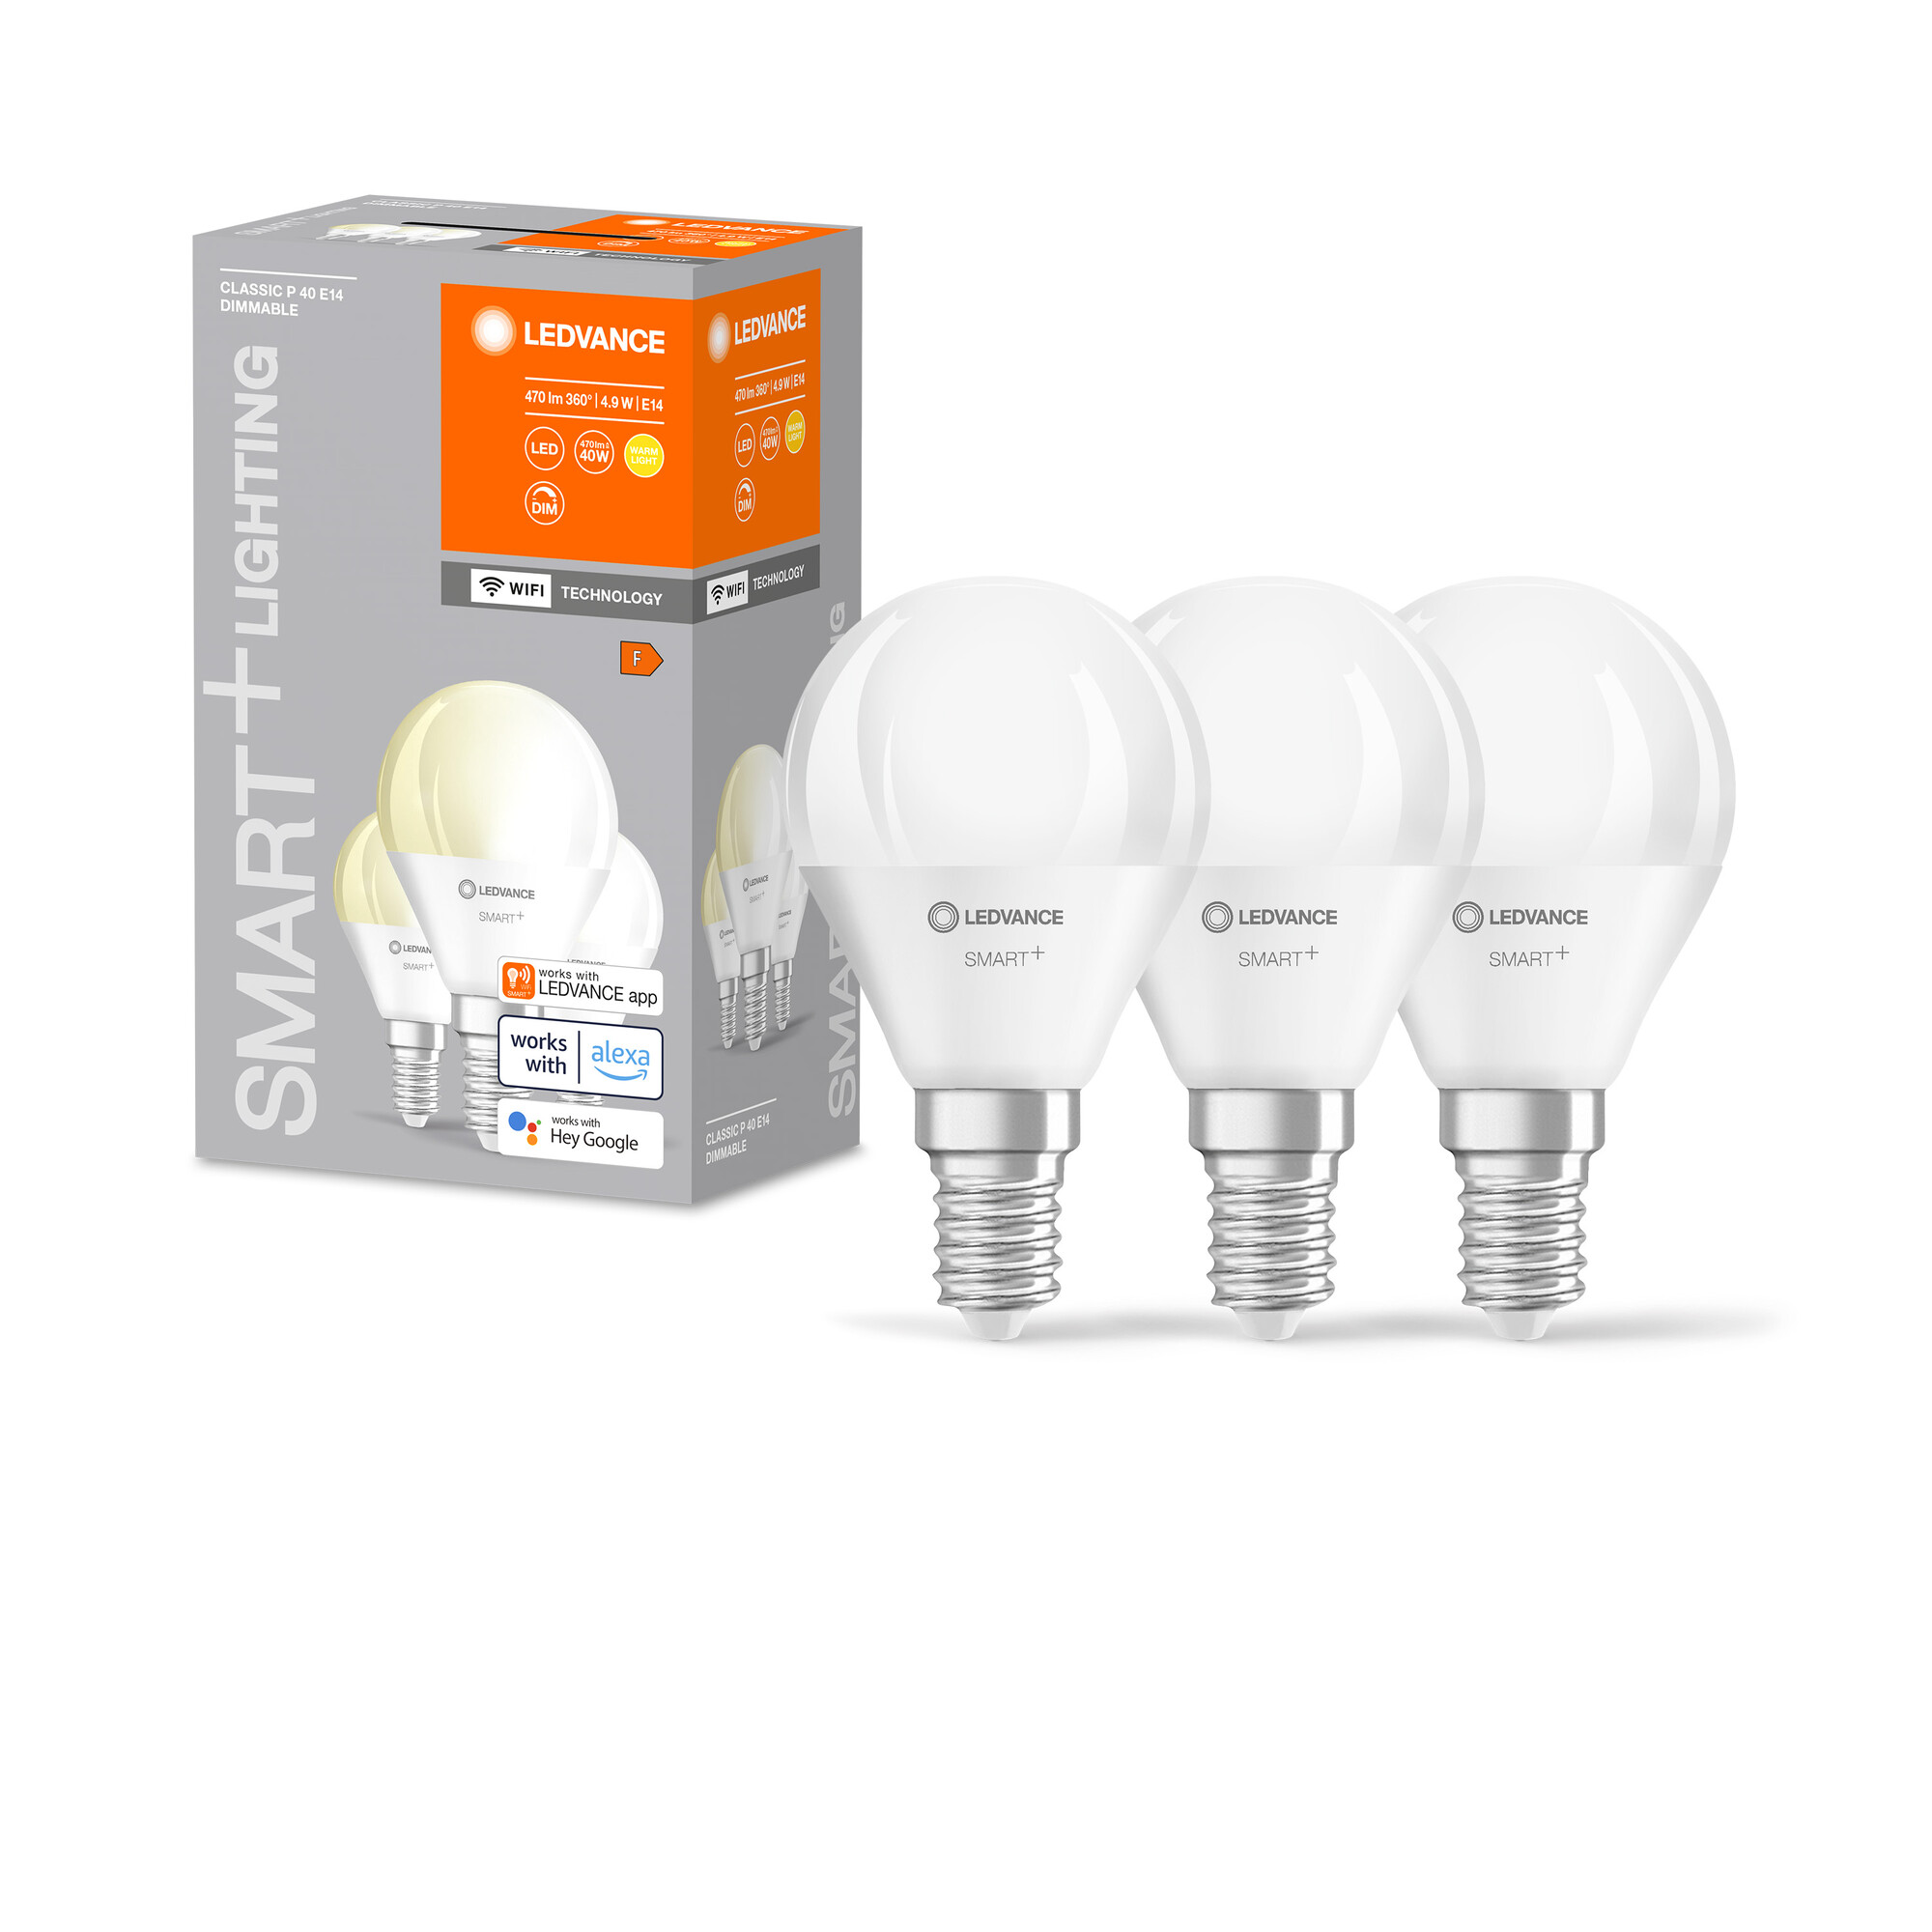 LED-Lampe 'Smart+ WiFi CLP' warmweiß 4,9 W E14 470 lm, dimmbar 3er-Pack + product picture